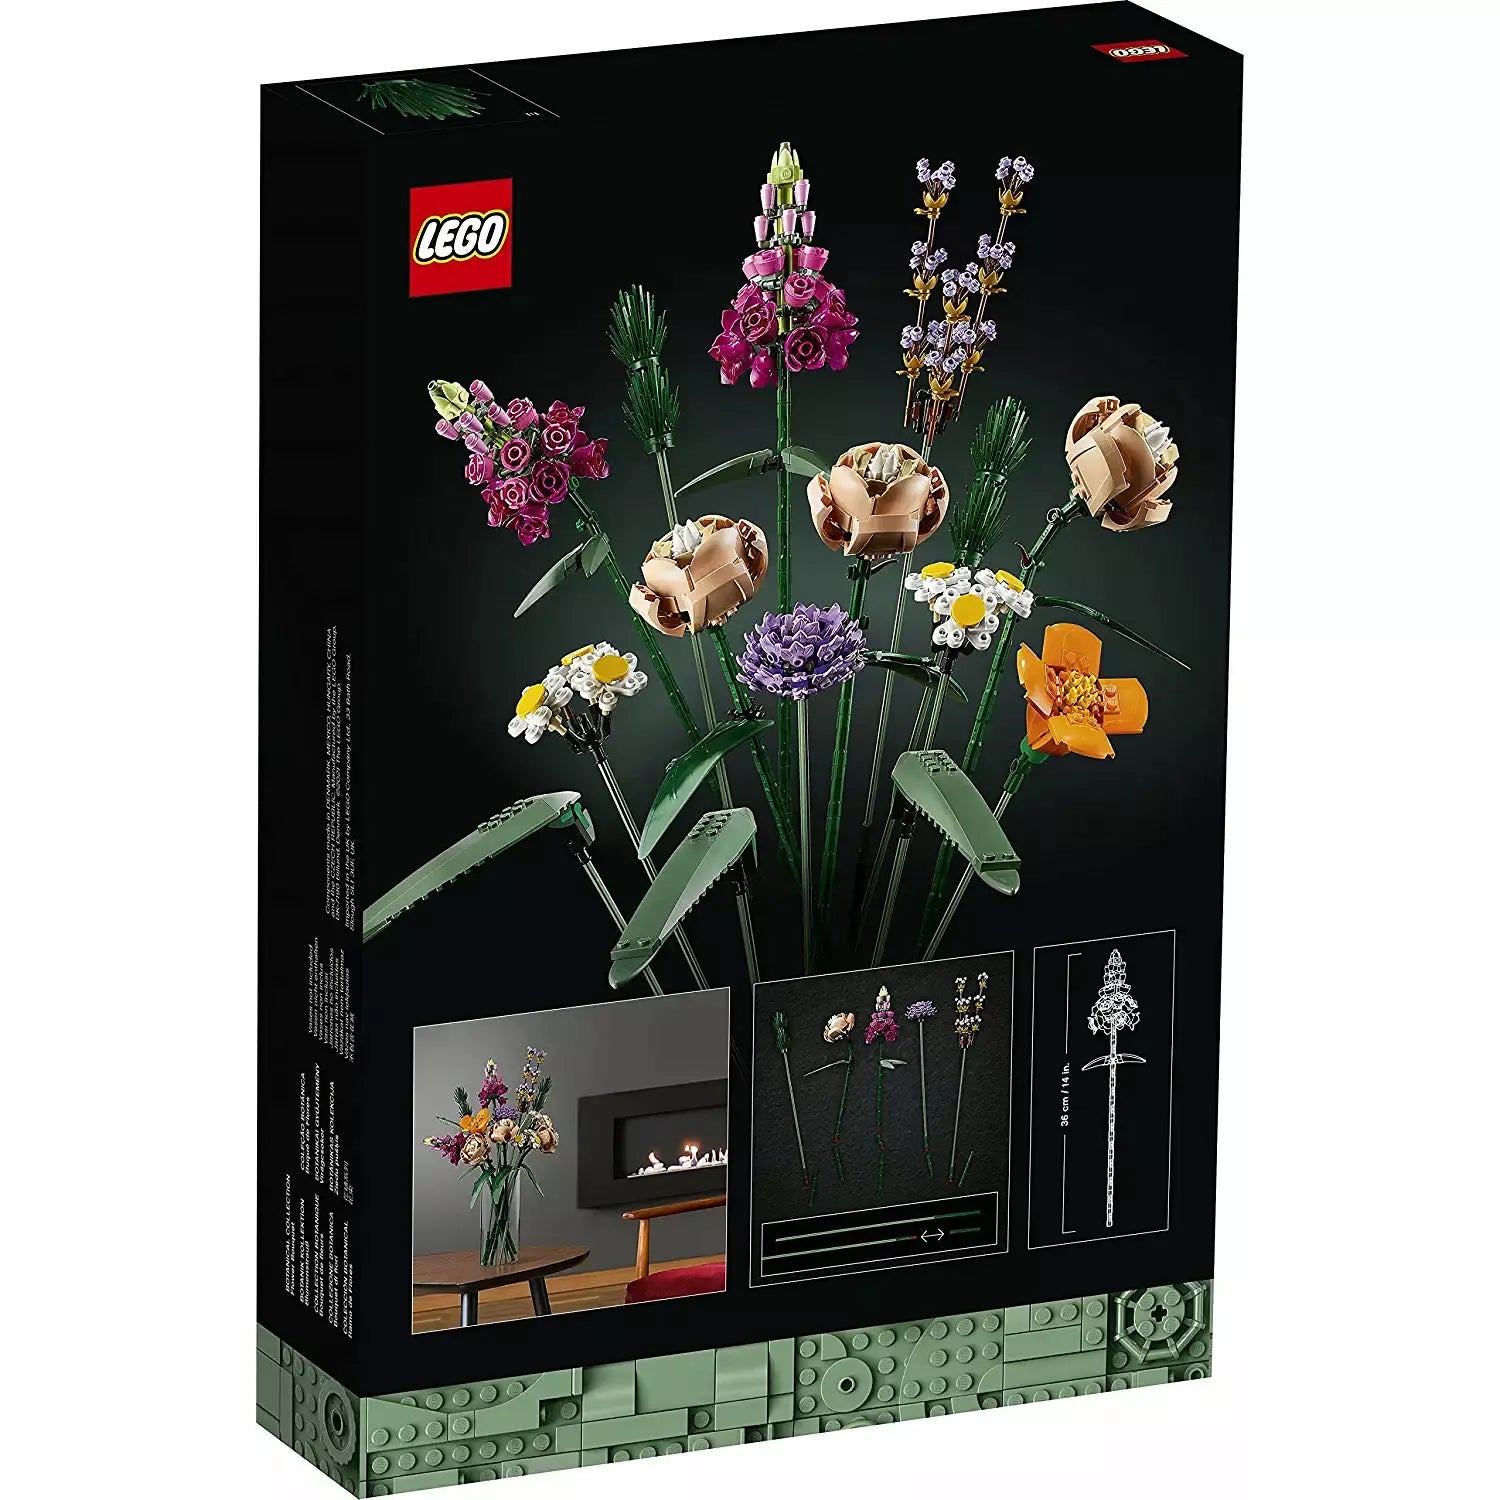 LEGO Icons Flower Bouquet 10280 Building Decoration Set - Artificial Flowers with Roses, Decorative Home Accessories, Gift for Him and Her, Botanical Collection and Table Art for Adults - BumbleToys - 14 Years & Up, 8+ Years, Girls, Icons, LEGO, OXE, Pre-Order